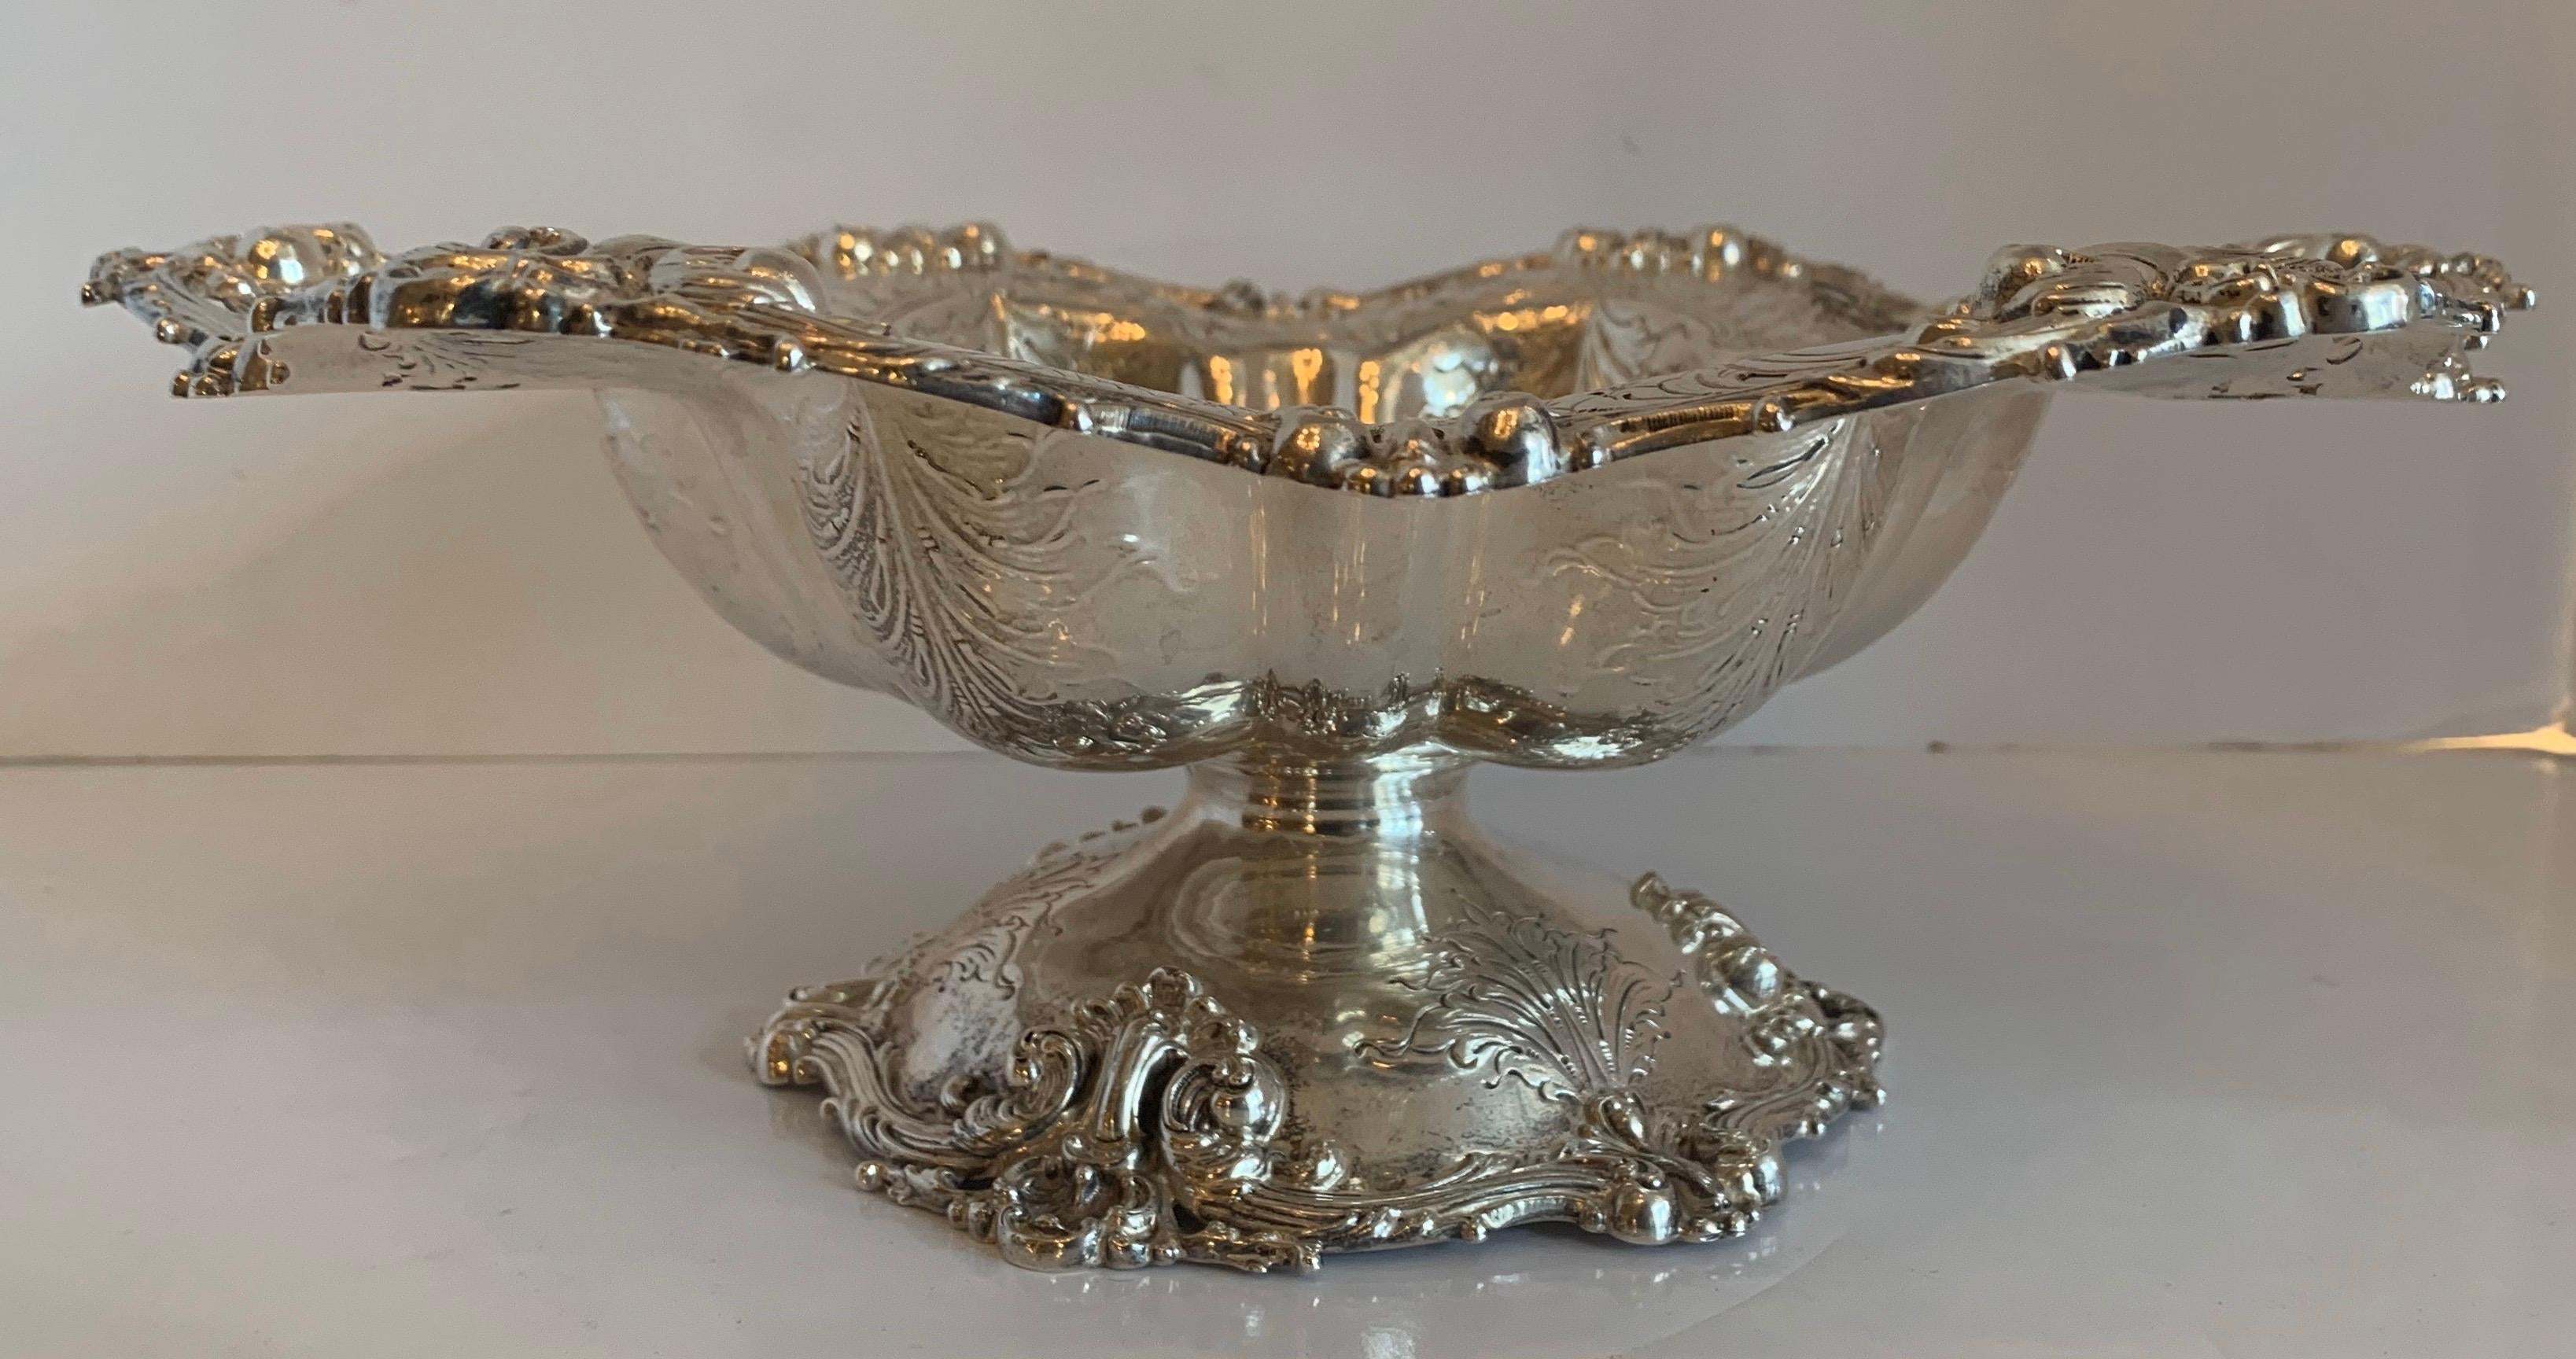 A wonderful sterling silver whiting pierced reposse hand chased centerpiece bowl

Measures: 13